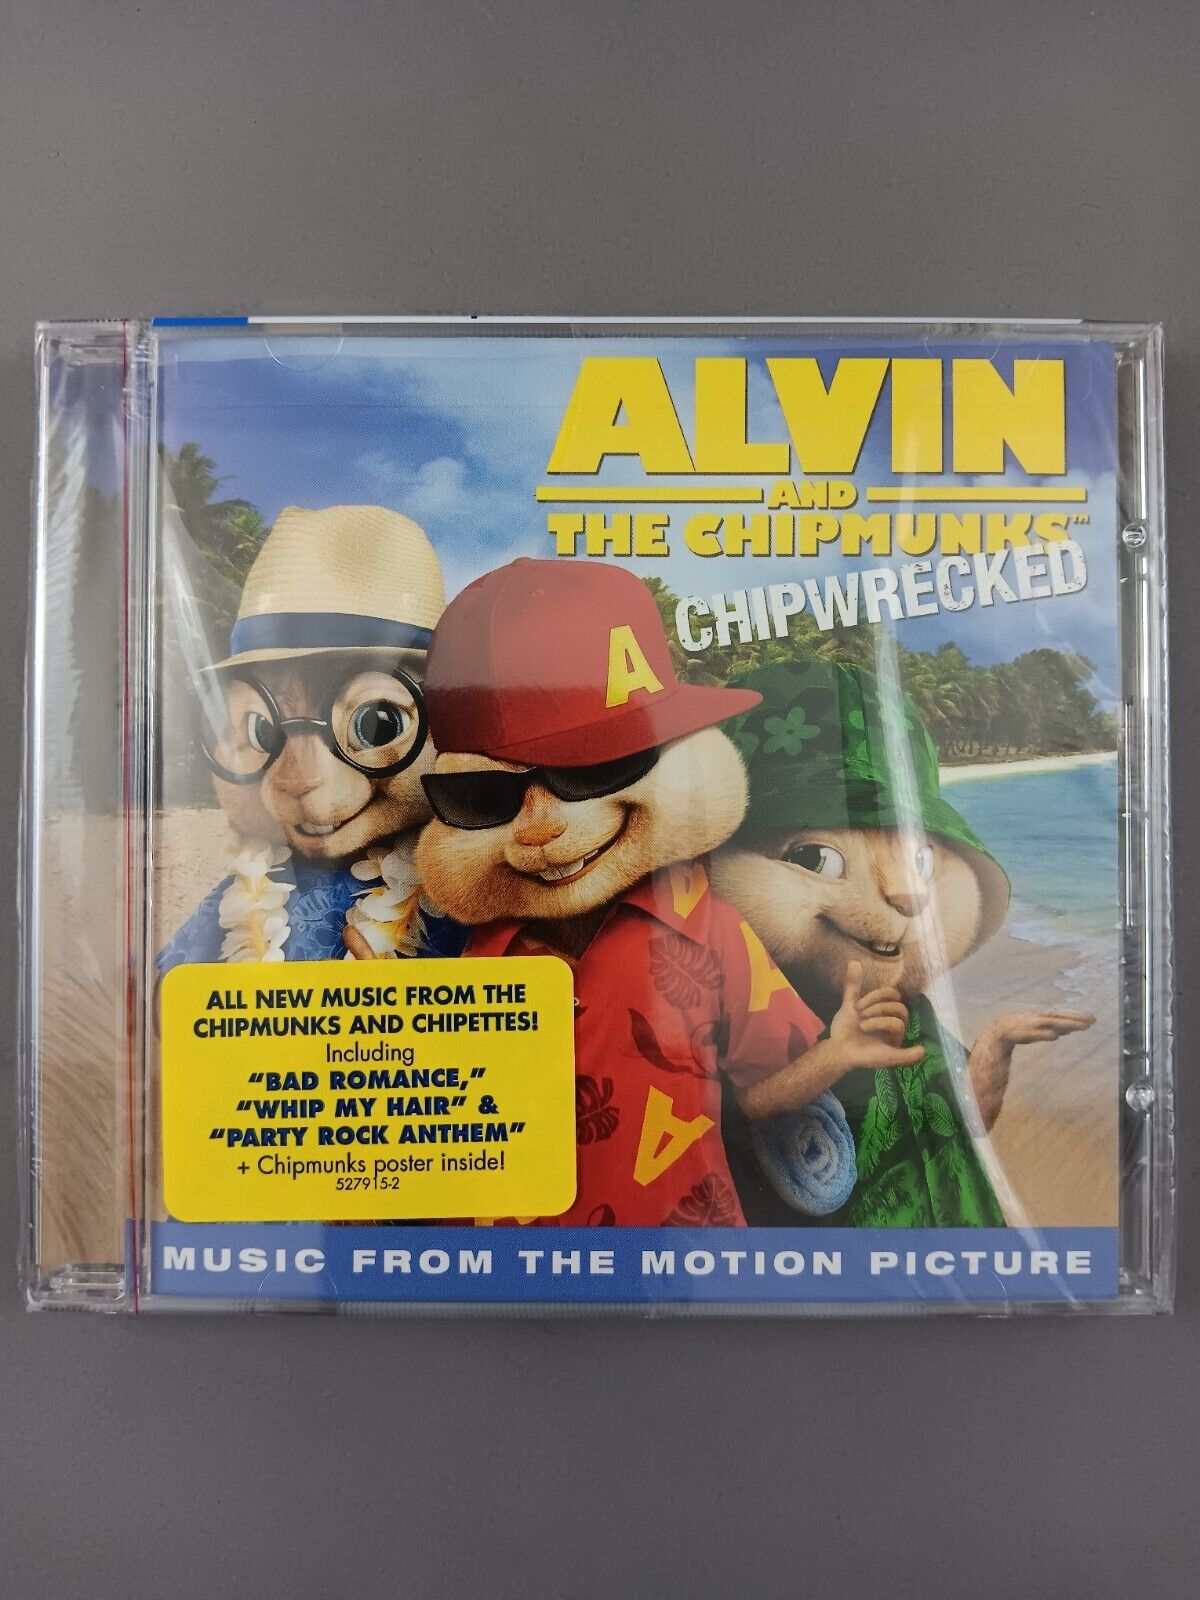 Alvin and the Chipmunks: Chipwrecked [Soundtrack]  - (CD) LIKE NEW (SEALED)